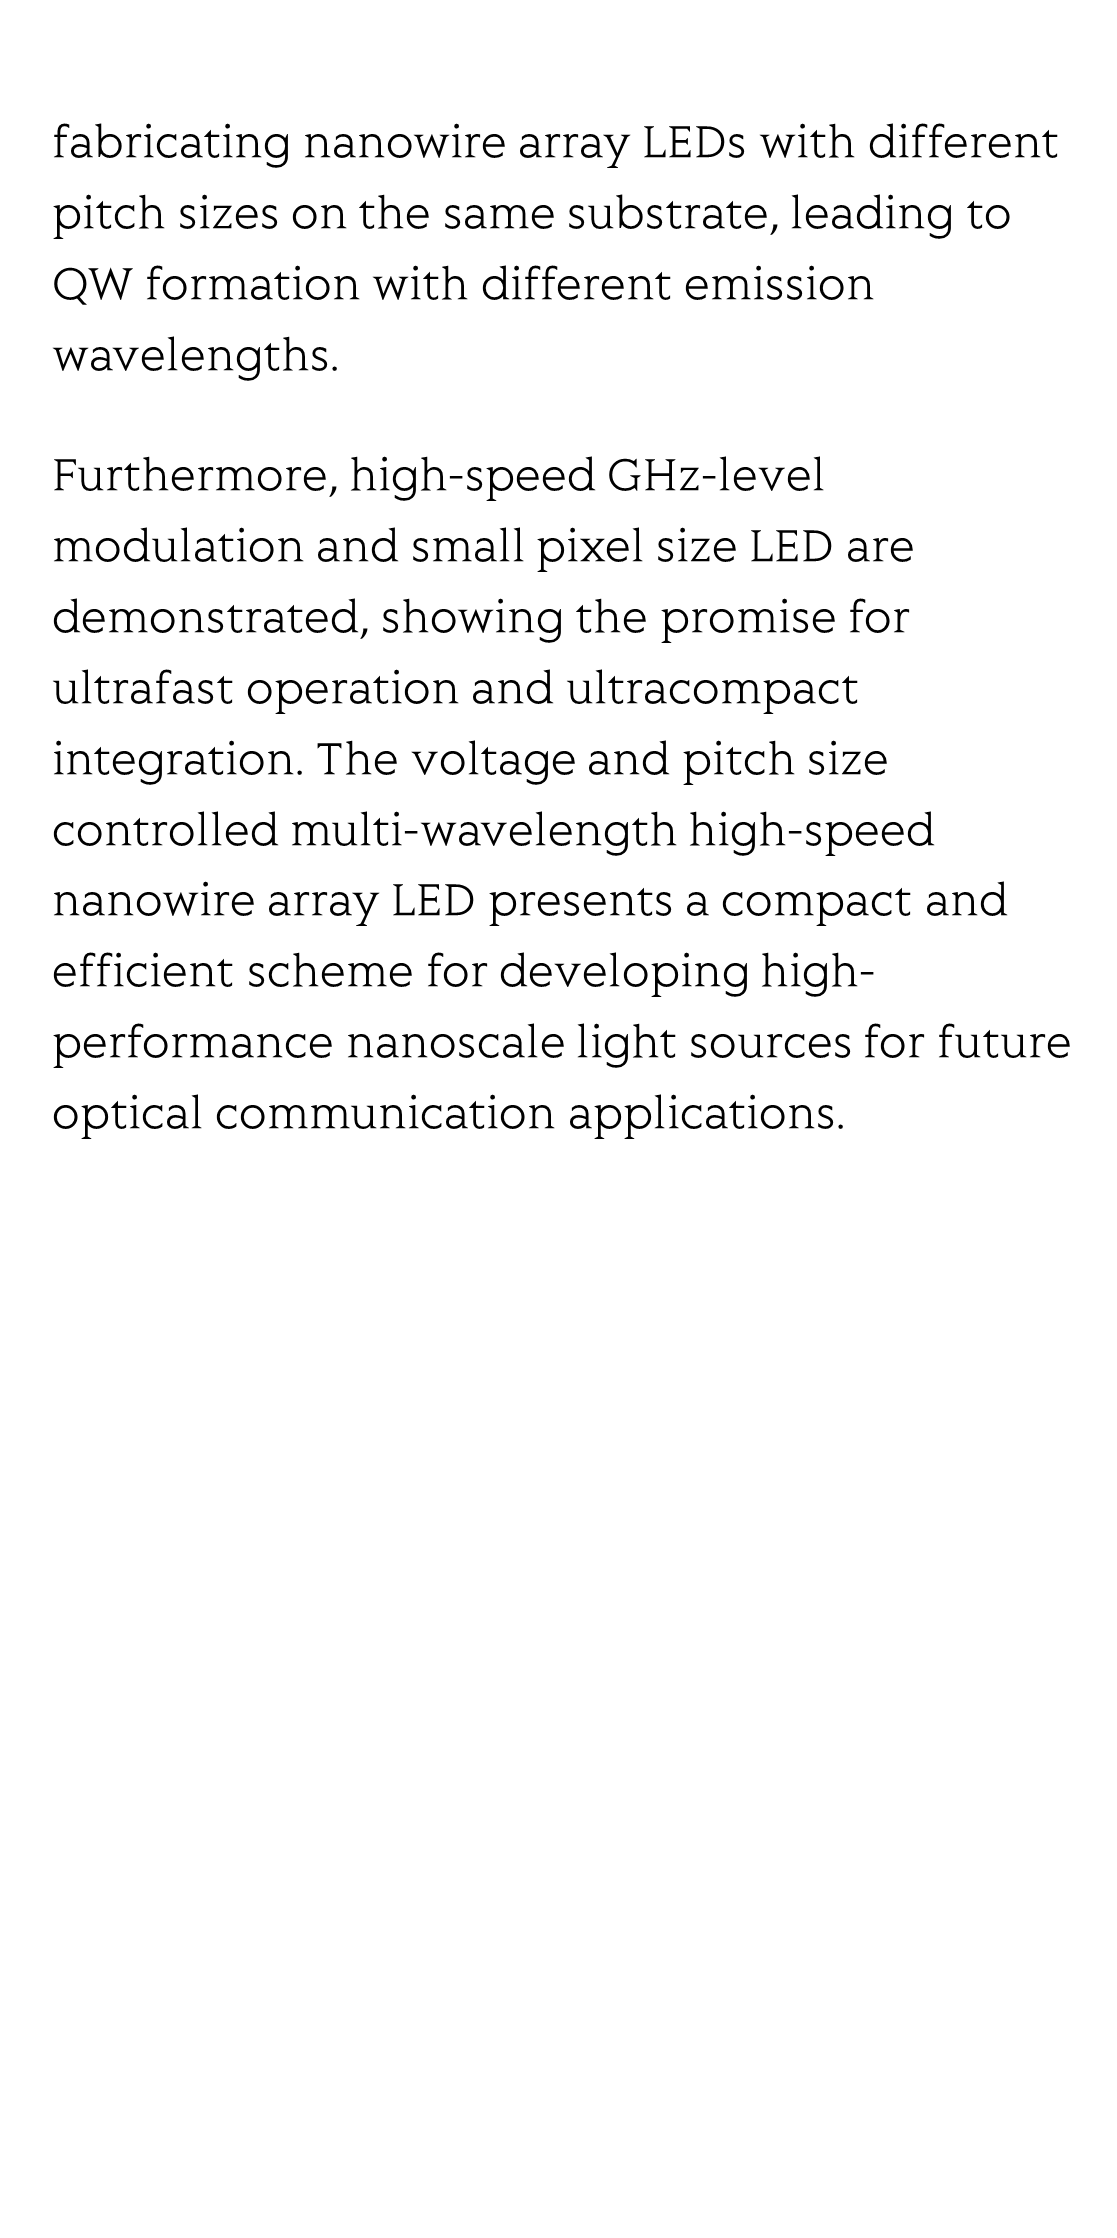 High-speed multiwavelength InGaAs/InP quantum well nanowire array micro-LEDs for next generation optical communications_3